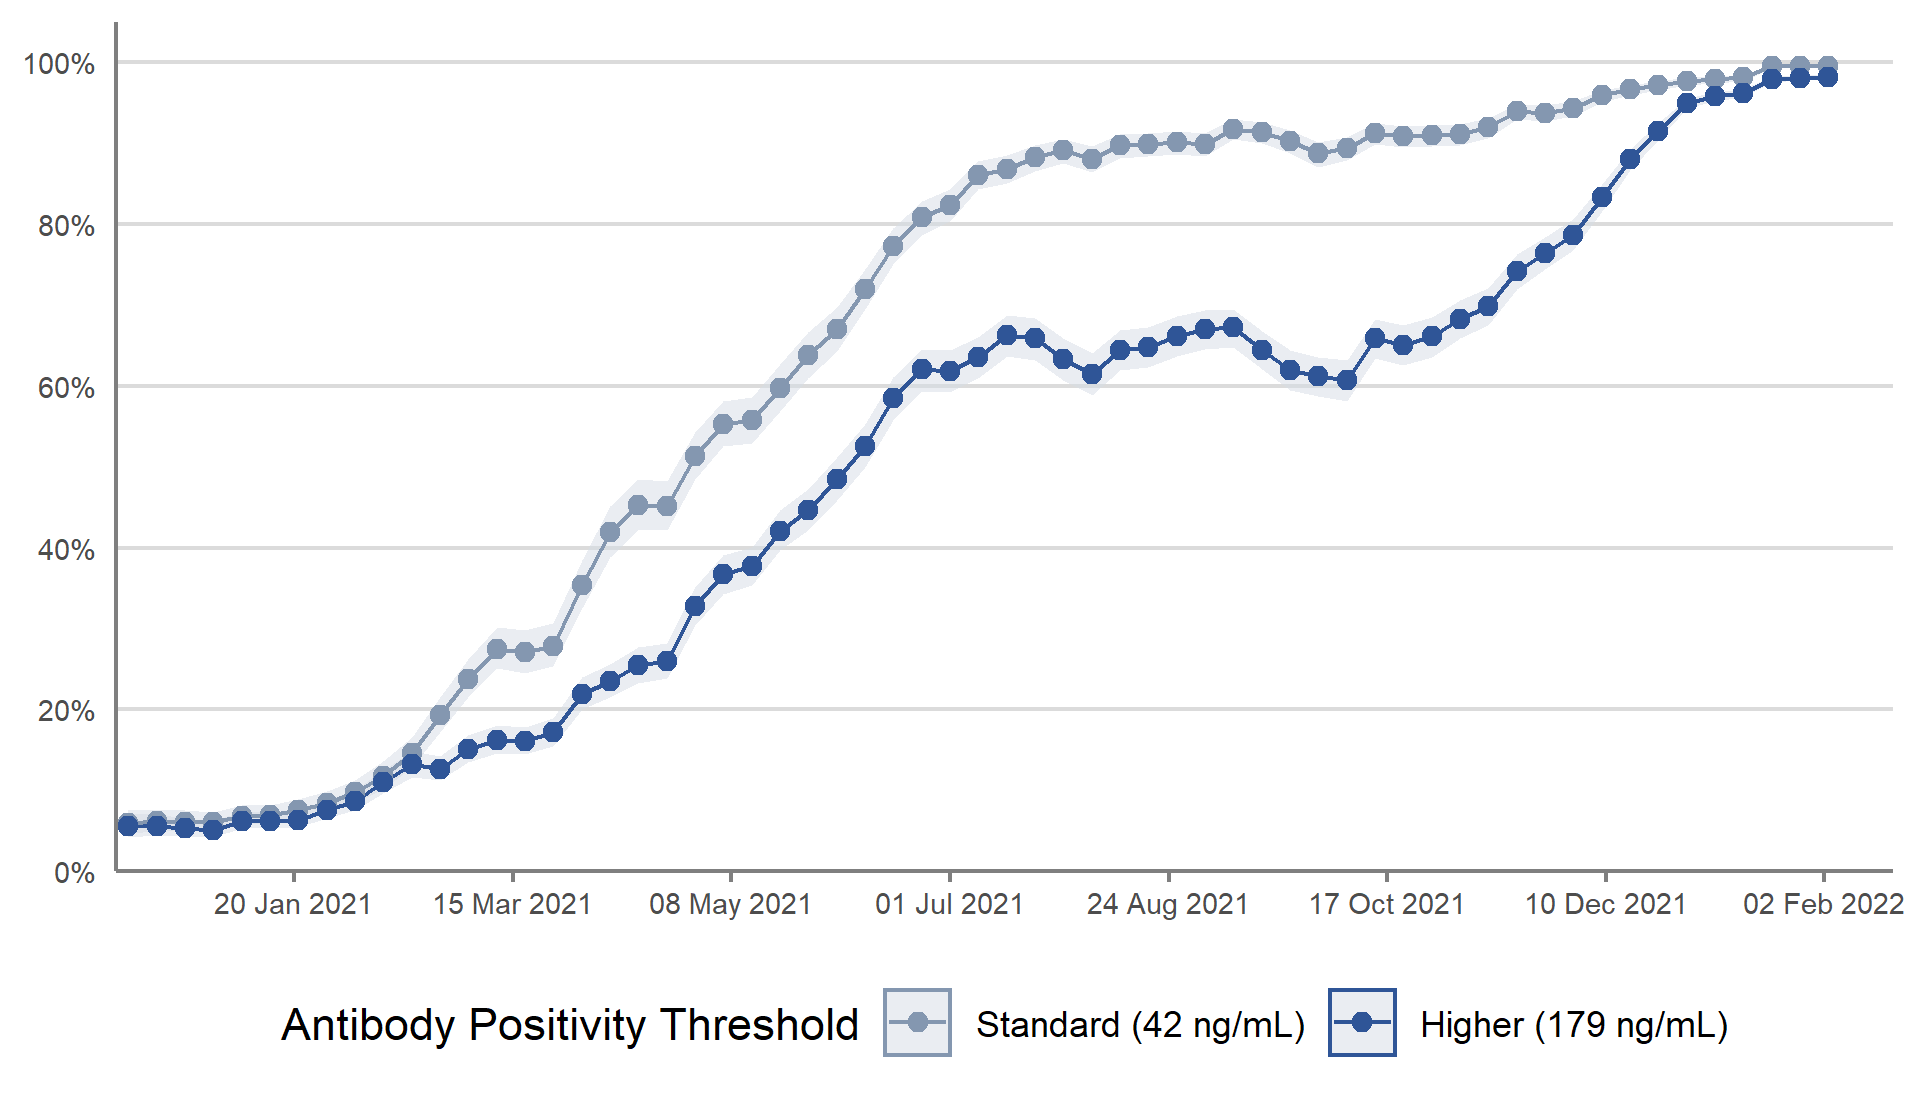 Antibody positivity at both the standard and higher antibody thresholds has continued to remain high in Scotland in recent weeks.